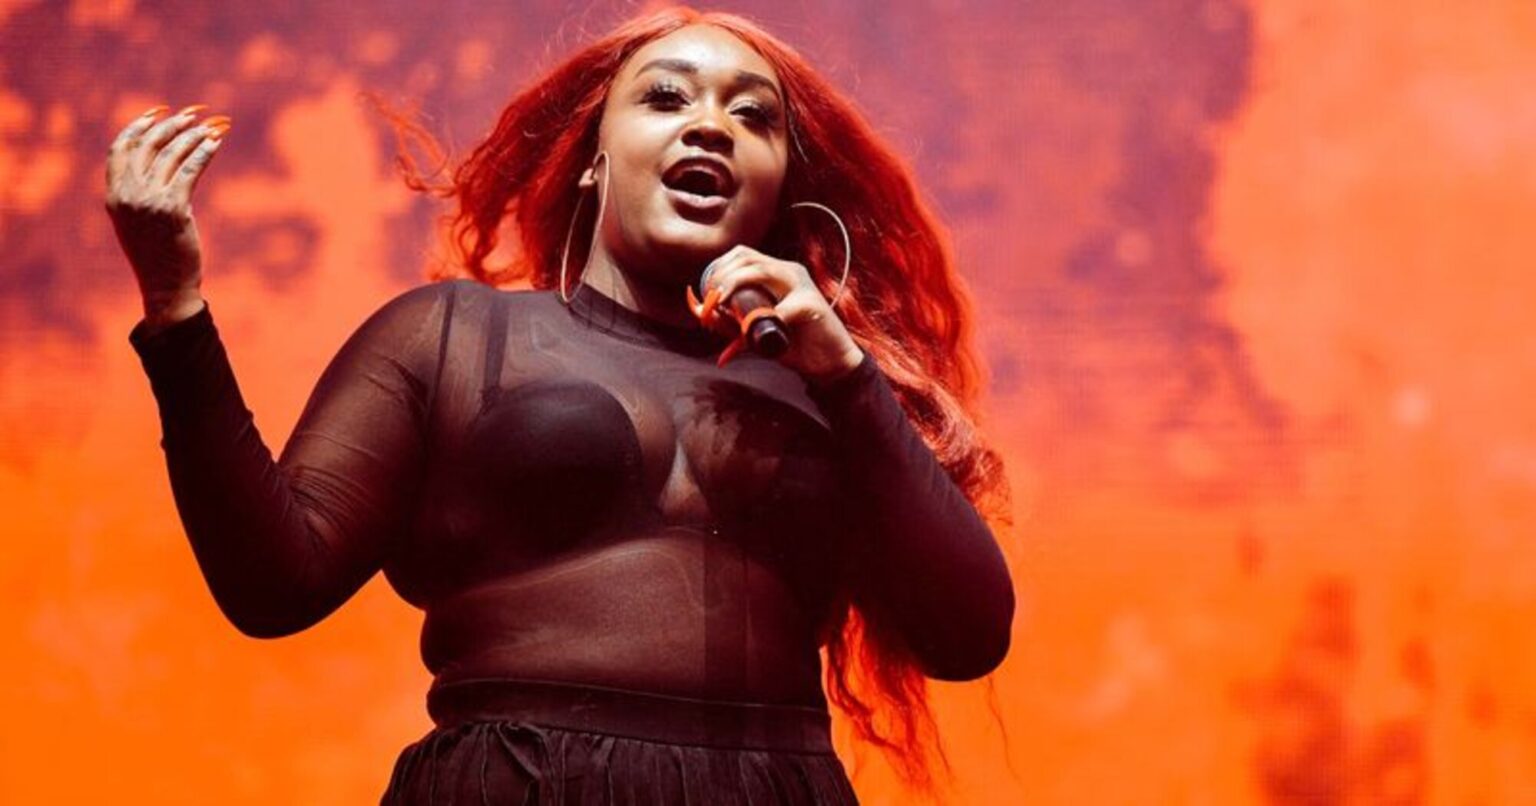 Rapper CupcakKe is ready to start some beef. Here are all the people she called out in her latest diss track.